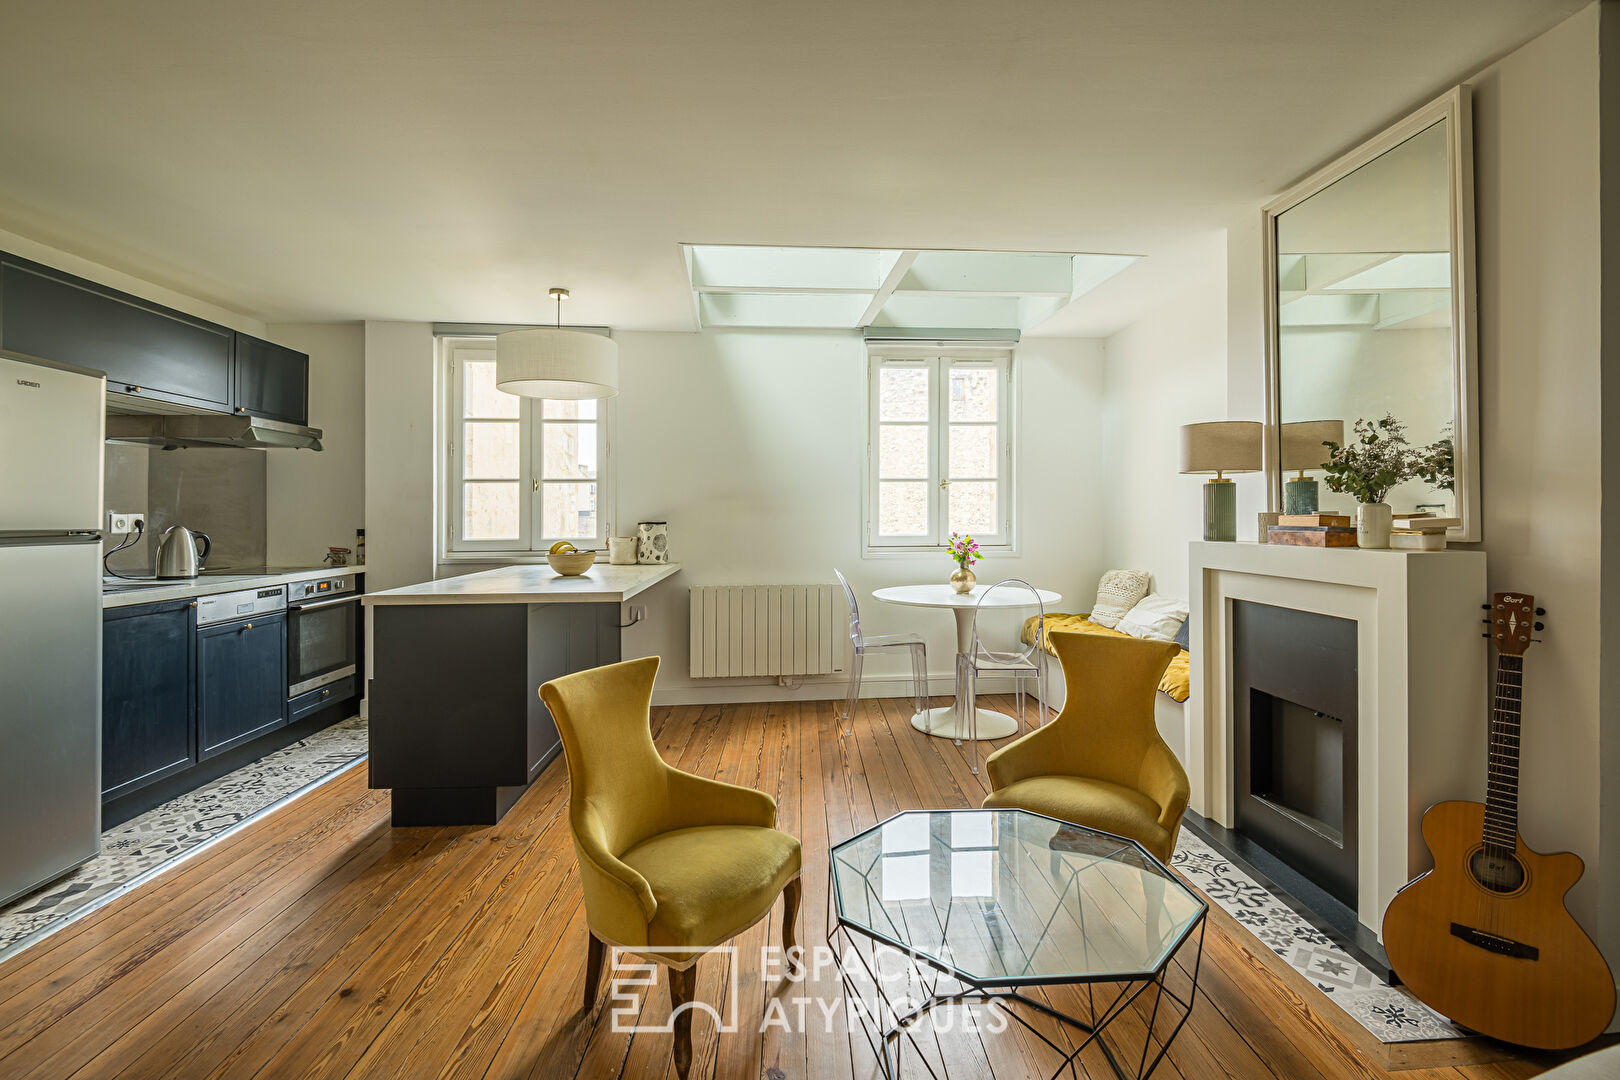 Duplex apartment in the heart of the city center